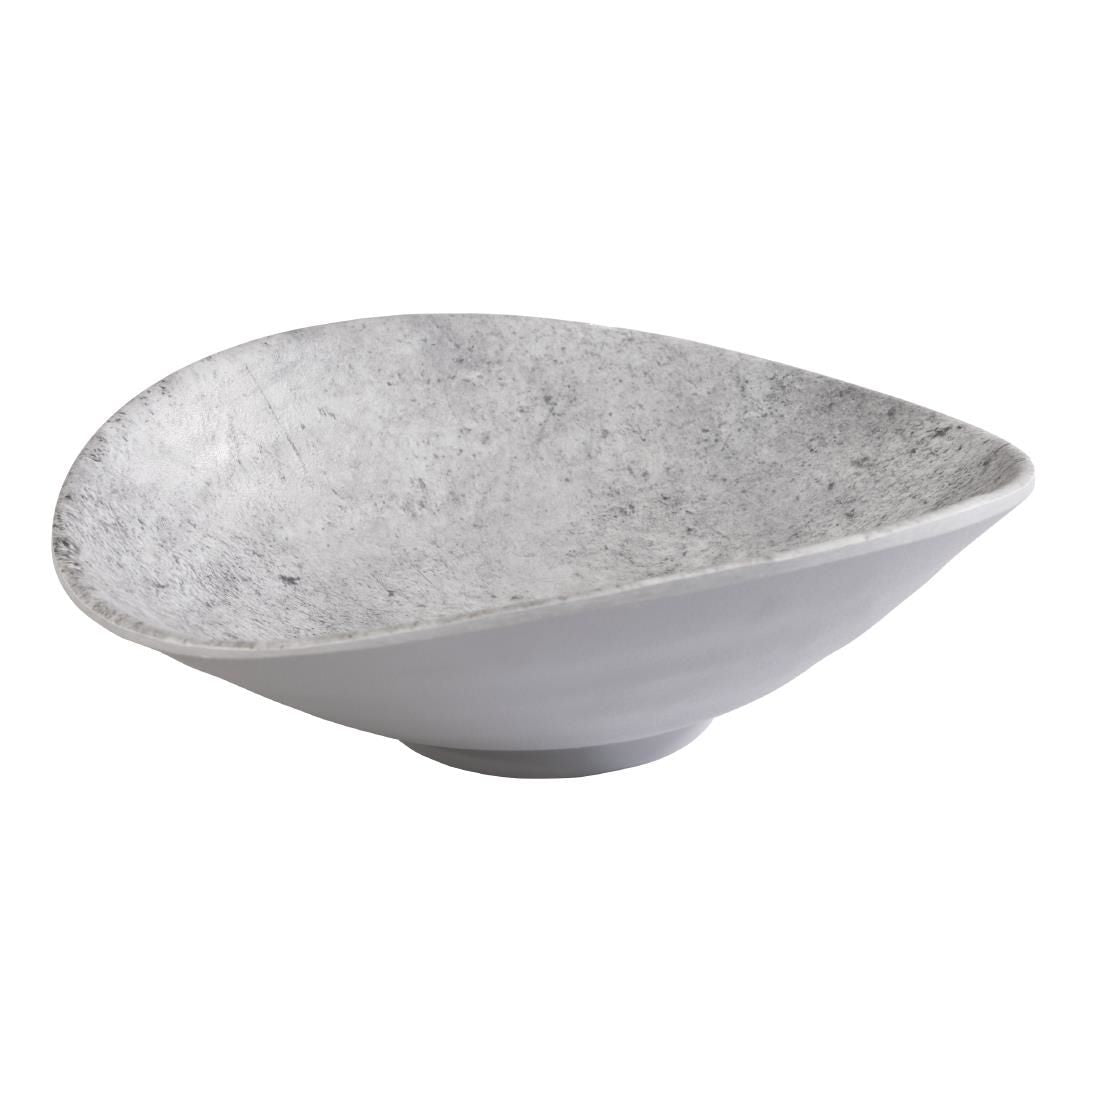 FB802 APS Element Curved Bowl 175 x 155mm JD Catering Equipment Solutions Ltd